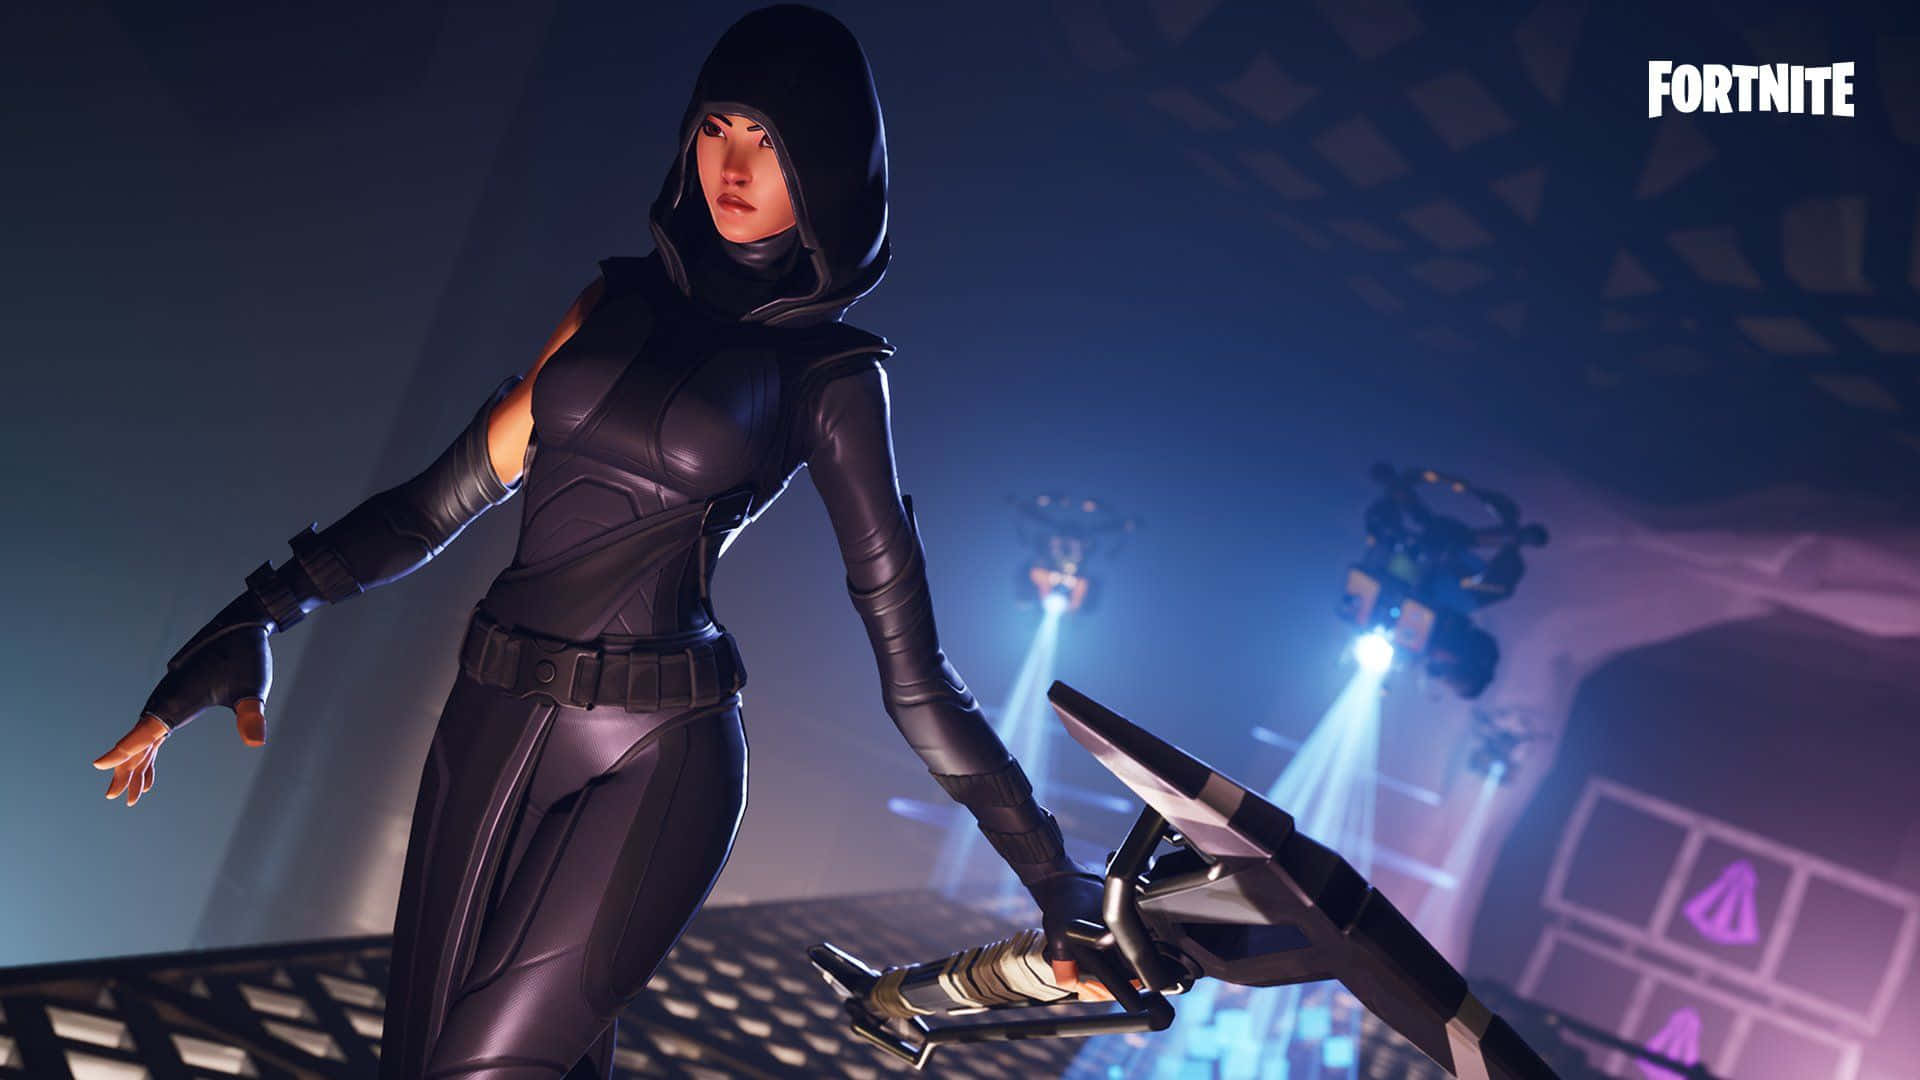 Fortnite - A Woman In Black Holding A Sword Wallpaper